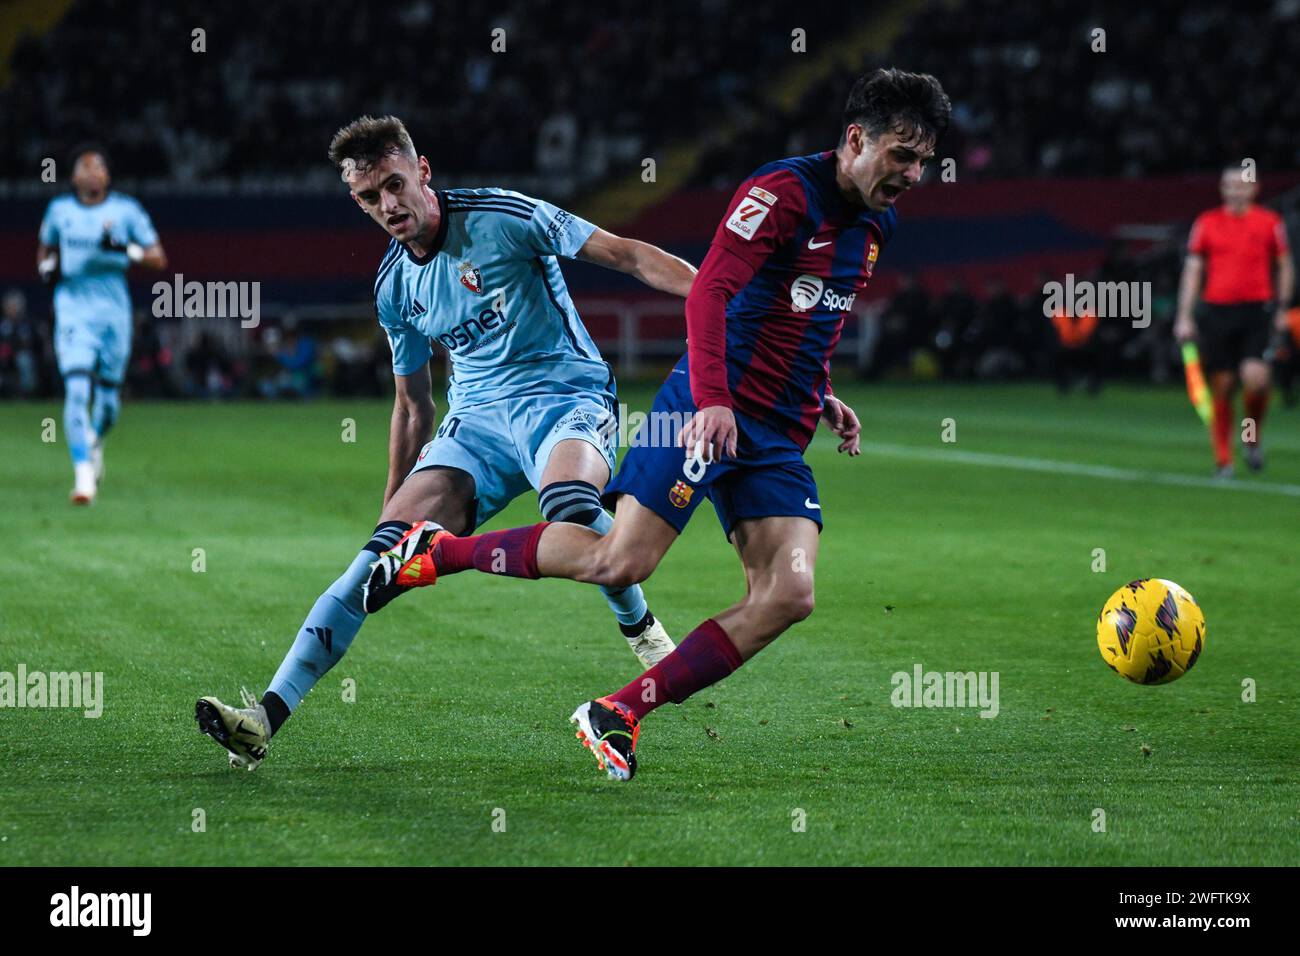 Girona, Spain. 31st Jan, 2024. BARCELONA, SPAIN - JANUARY 31: Match between FC Barcelona and Osasuna CF as part of La Liga at Lluis Companys Stadium on January 31, 2024 in Girona, Spain. (Photo by Sara Aribó/PxImages) Credit: Px Images/Alamy Live News Stock Photo